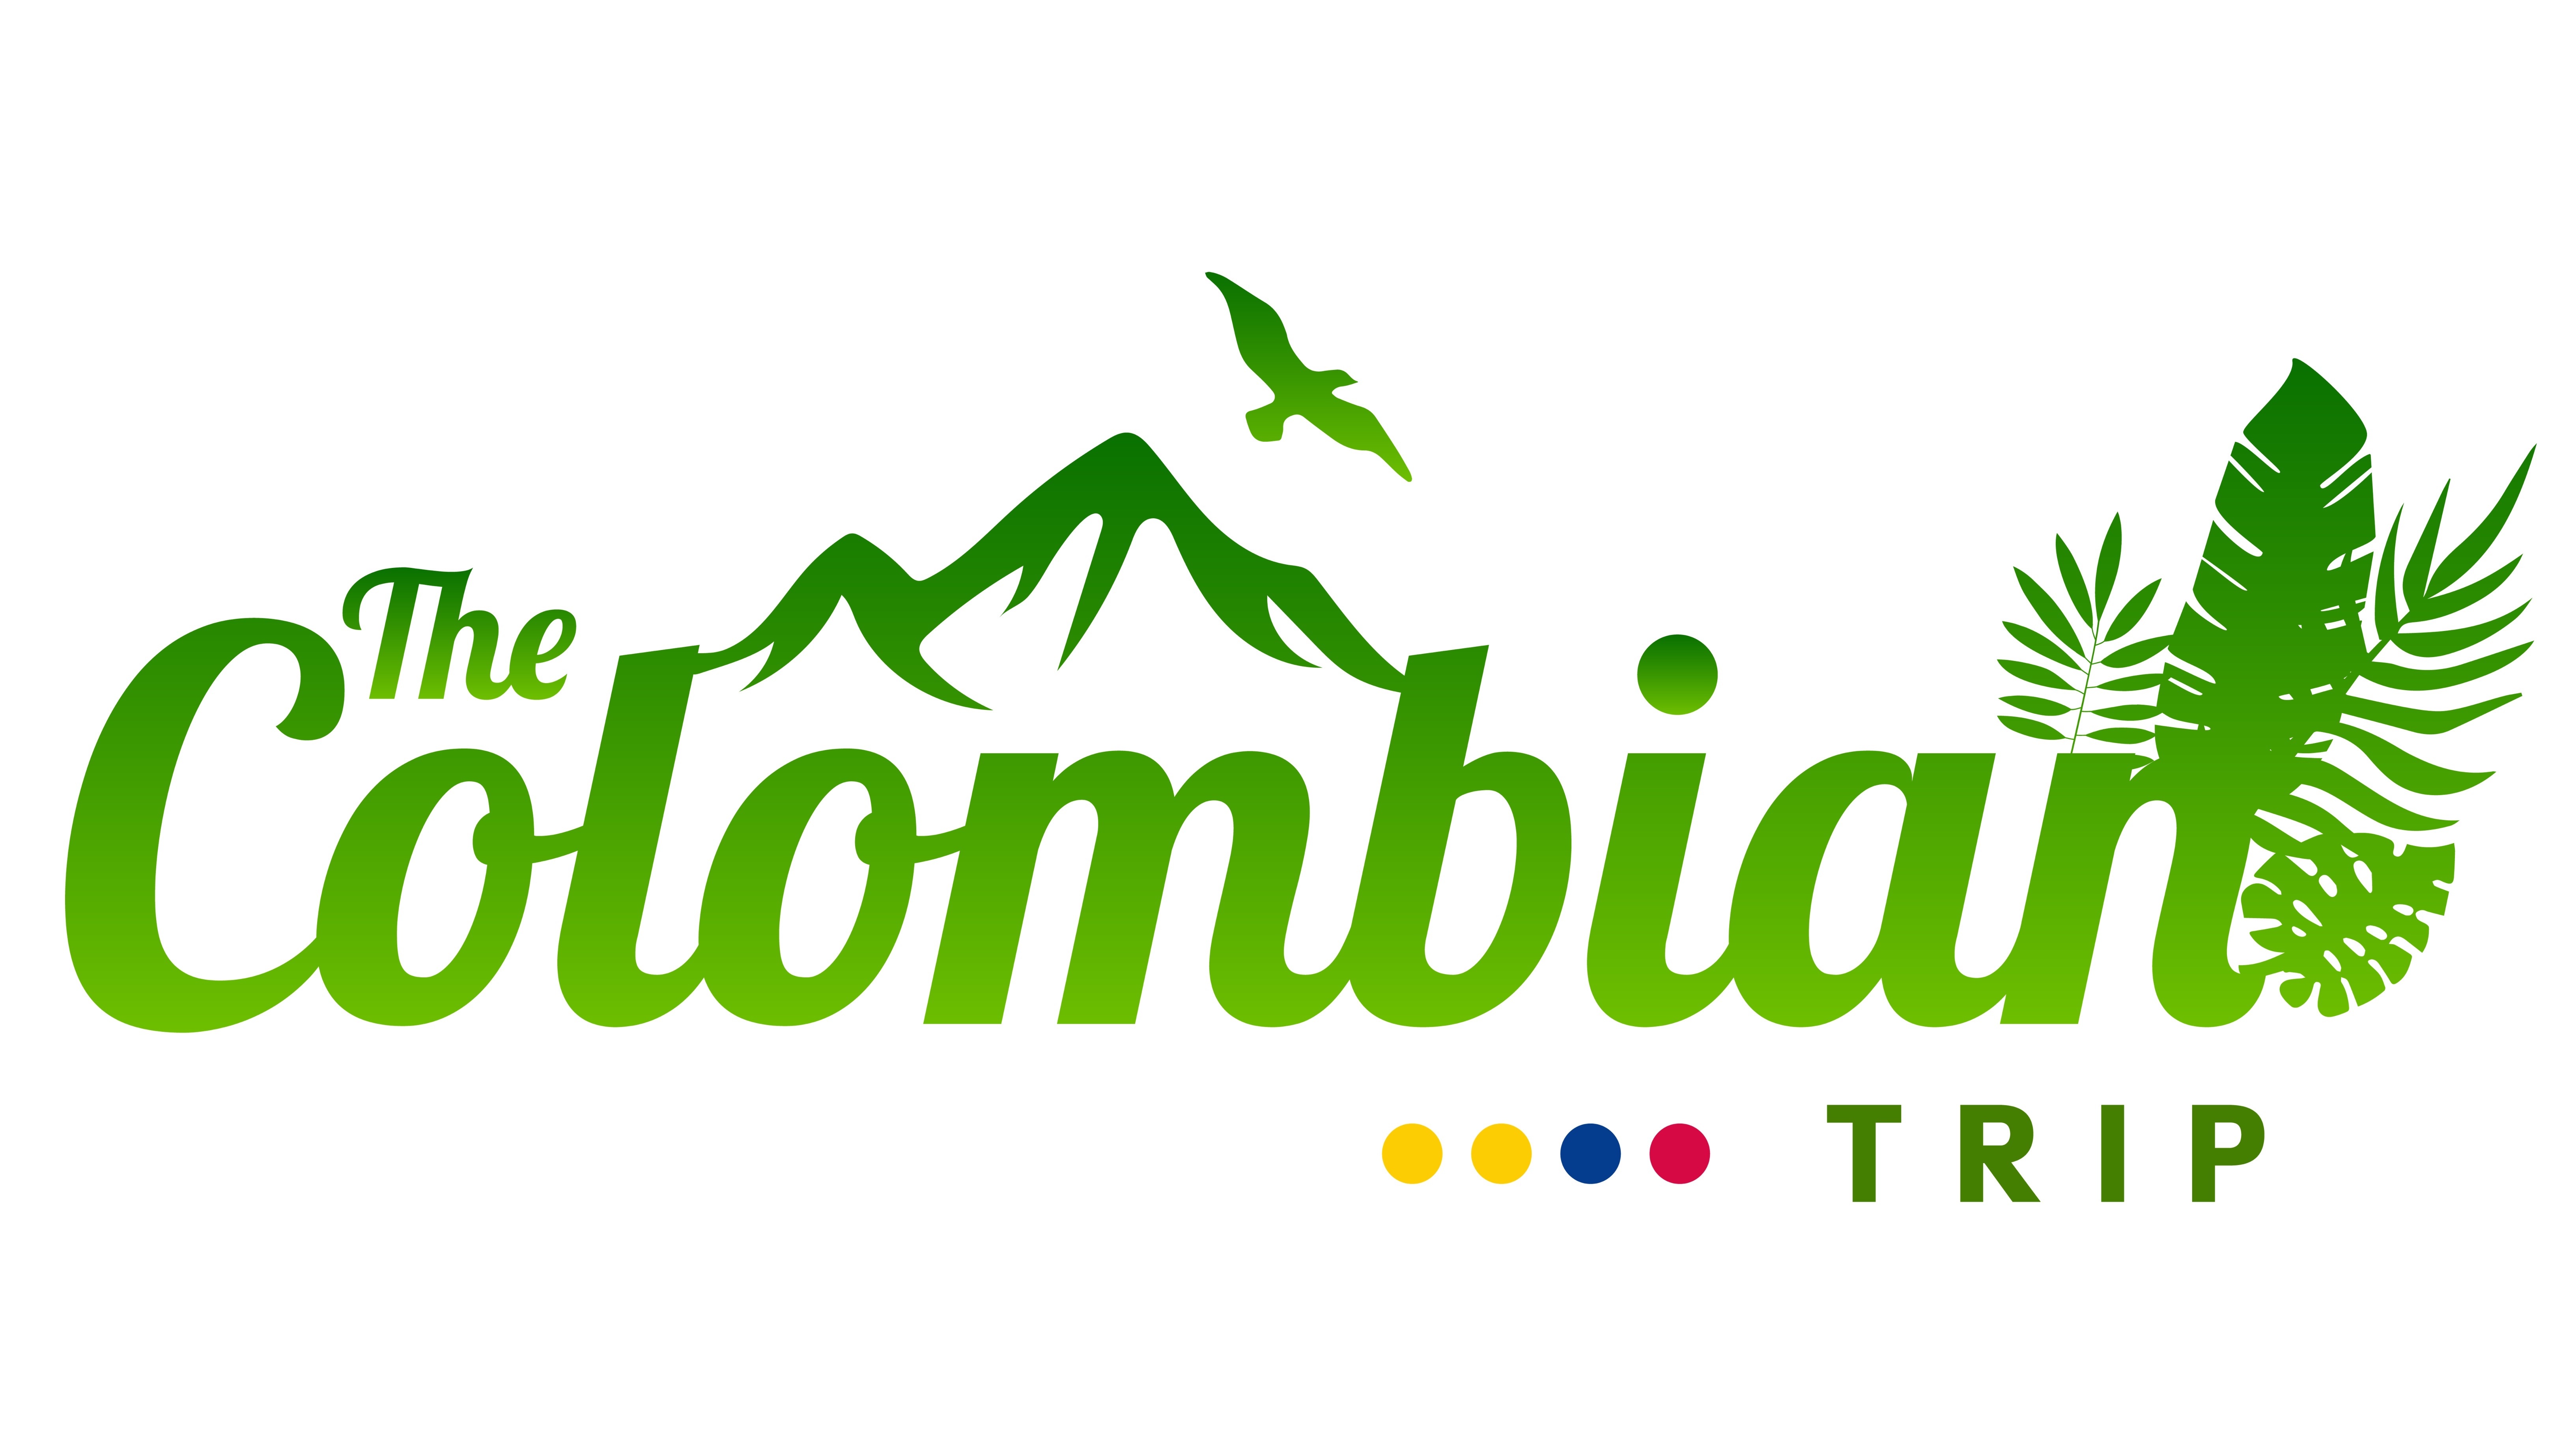 The Colombian Trip logo